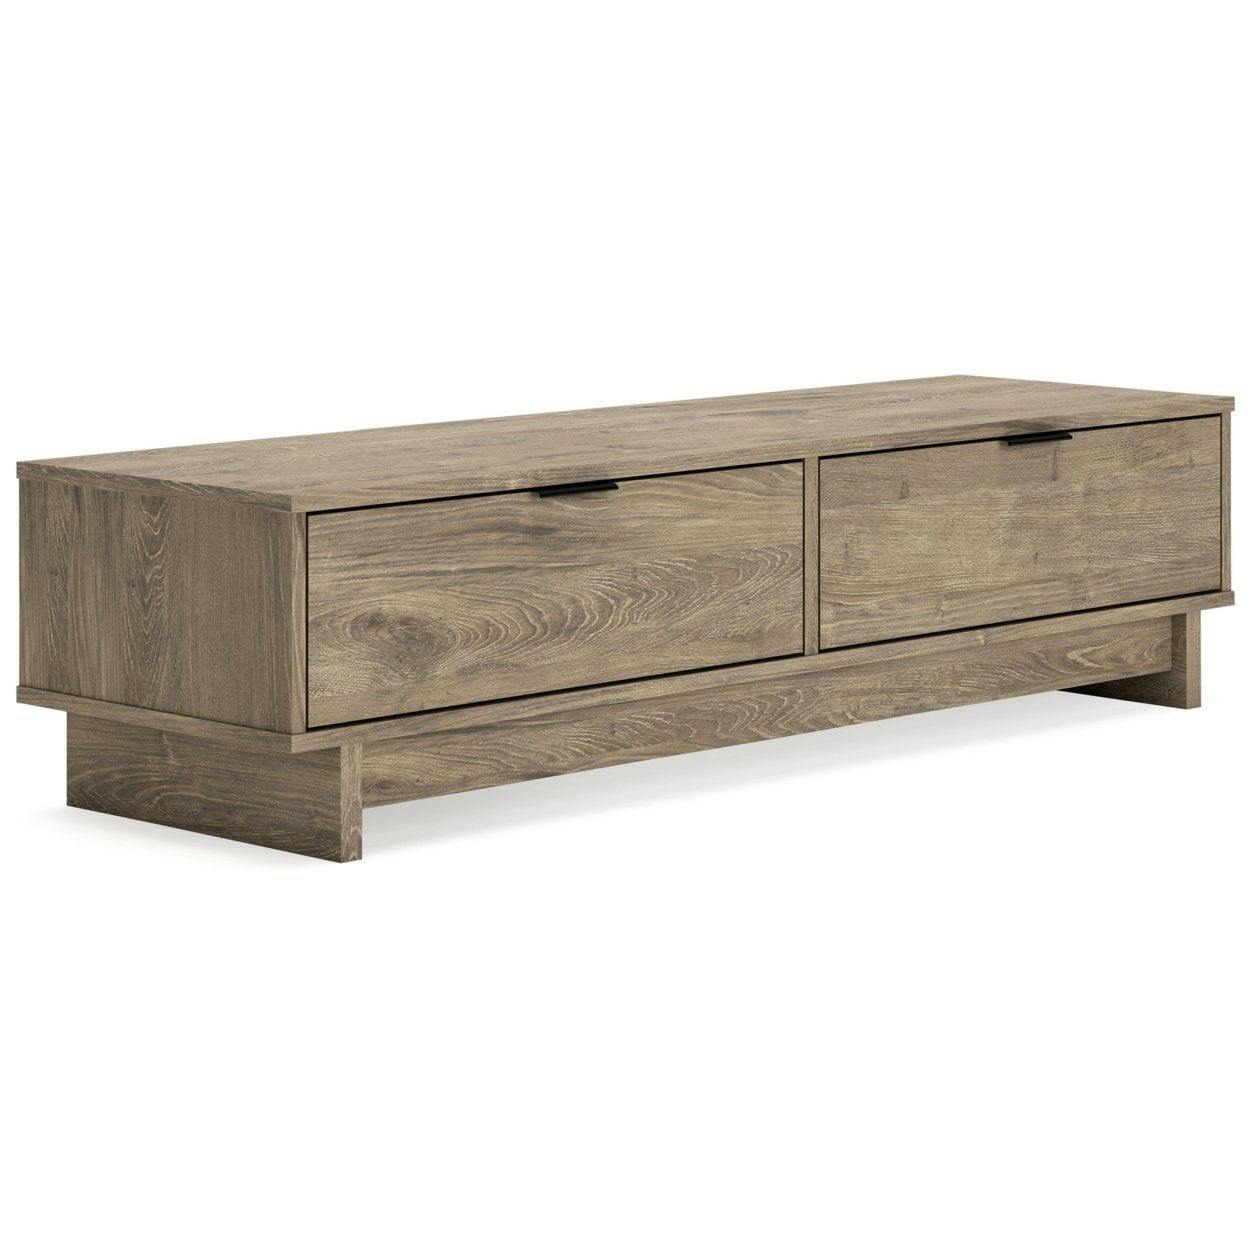 Rustic Oak Grain 53" Storage Bench with 2 Gliding Drawers